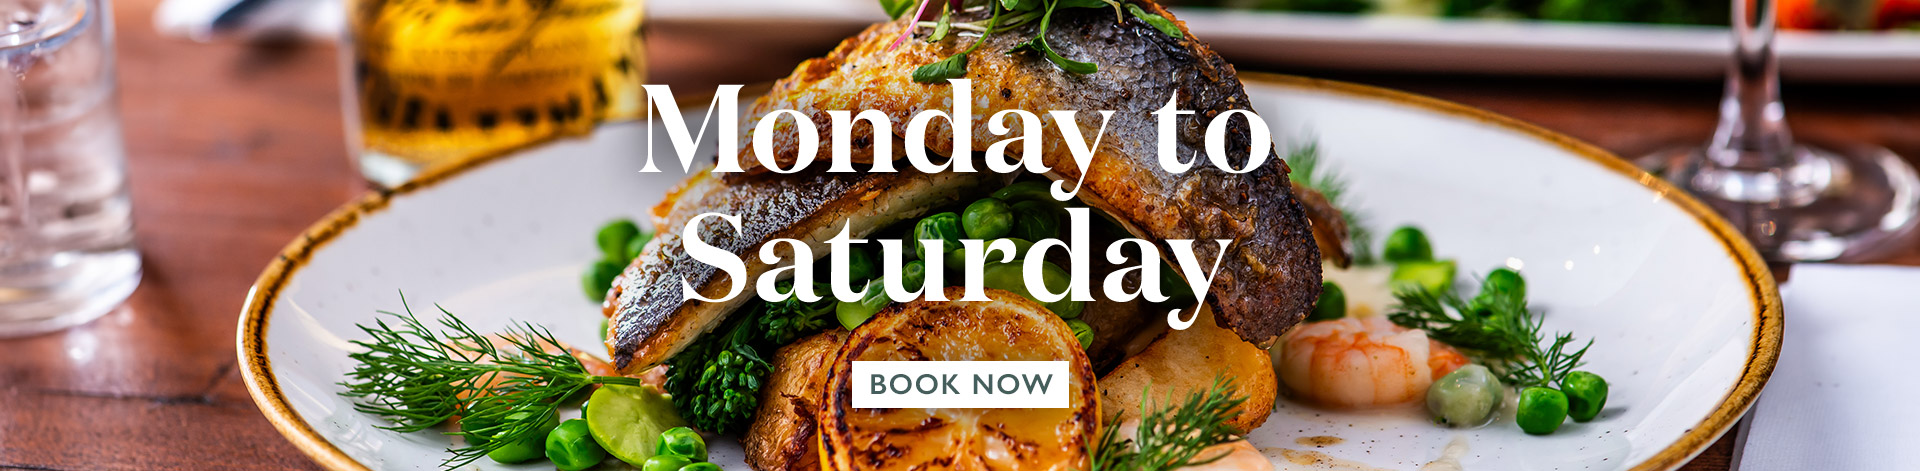 Book now at The Firecrest